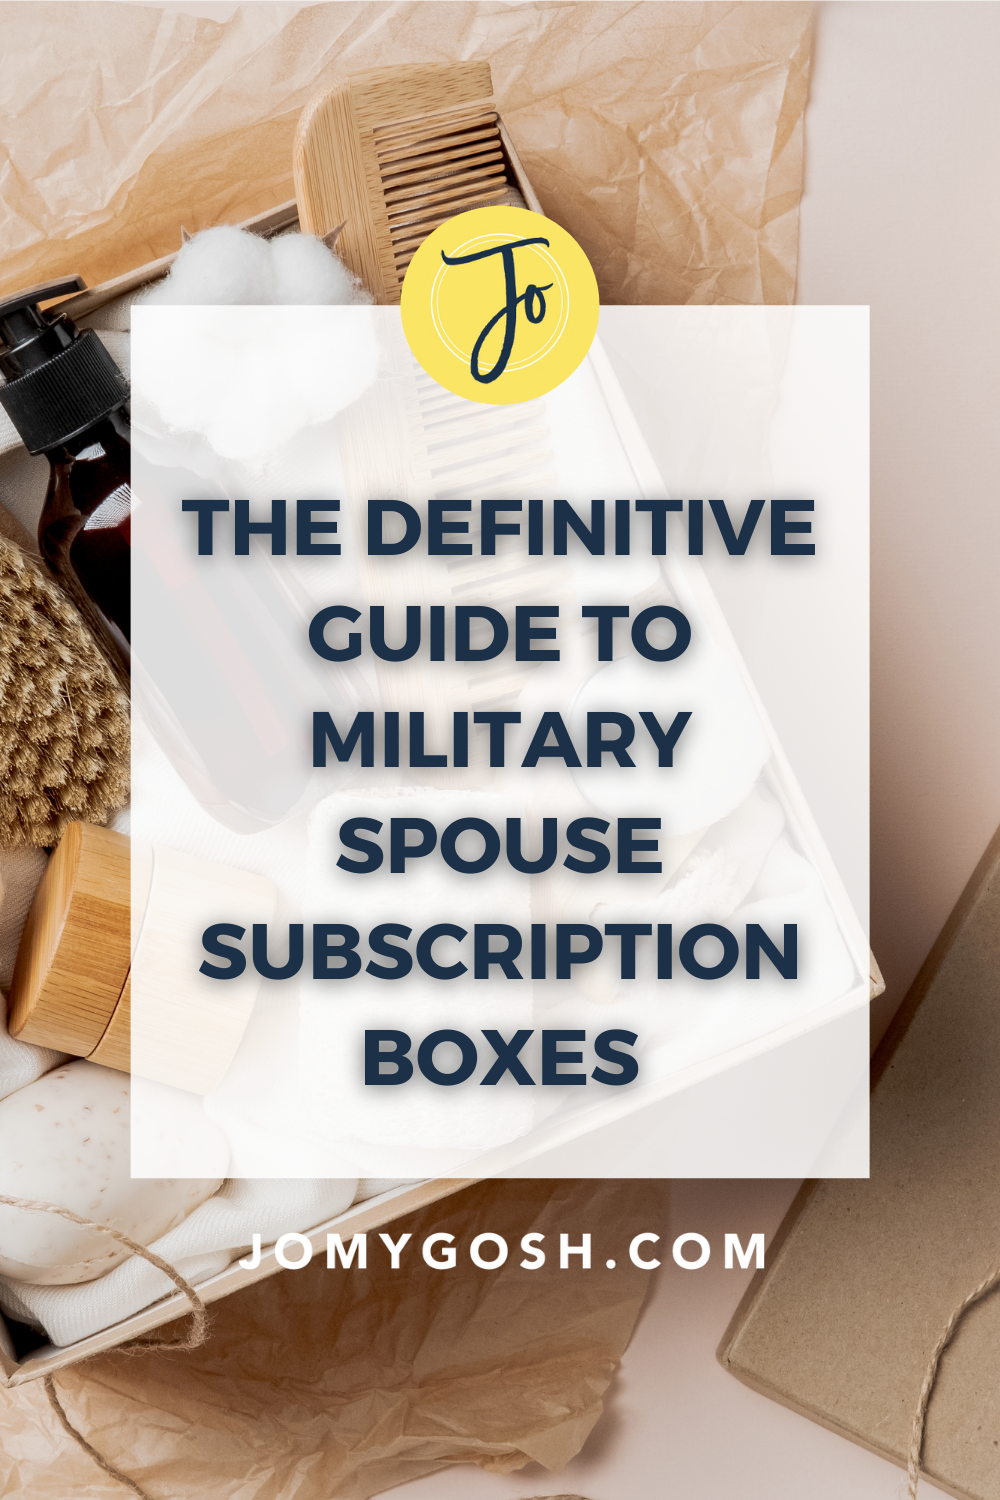 Did you know there are subscriptions boxes made for military spouses, by military spouses?